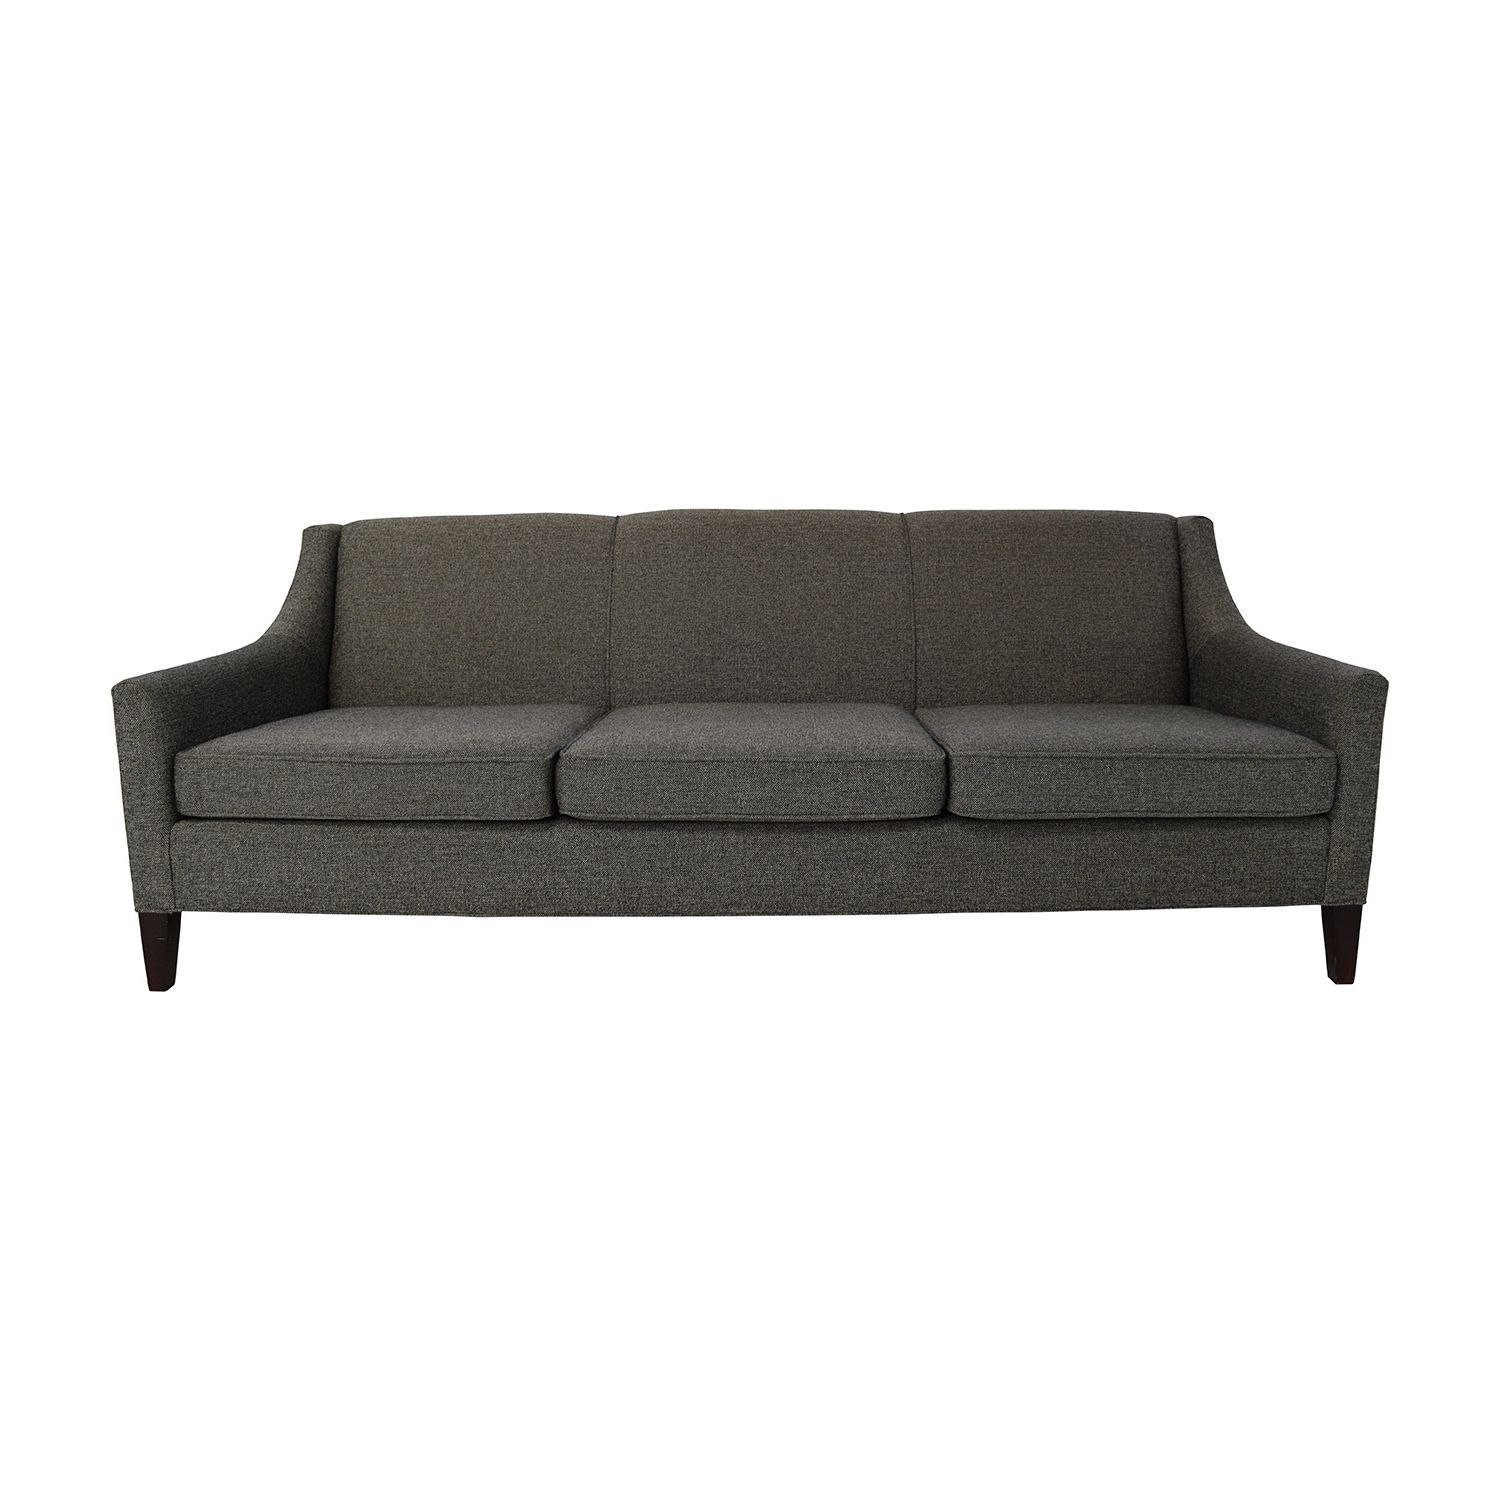 [%62% Off – Mitchell Gold And Bob Williams Mitchell Gold + Bob Intended For Well Liked Mitchell Gold Sofas|mitchell Gold Sofas Pertaining To Well Known 62% Off – Mitchell Gold And Bob Williams Mitchell Gold + Bob|well Liked Mitchell Gold Sofas Throughout 62% Off – Mitchell Gold And Bob Williams Mitchell Gold + Bob|2019 62% Off – Mitchell Gold And Bob Williams Mitchell Gold + Bob Inside Mitchell Gold Sofas%] (View 3 of 20)